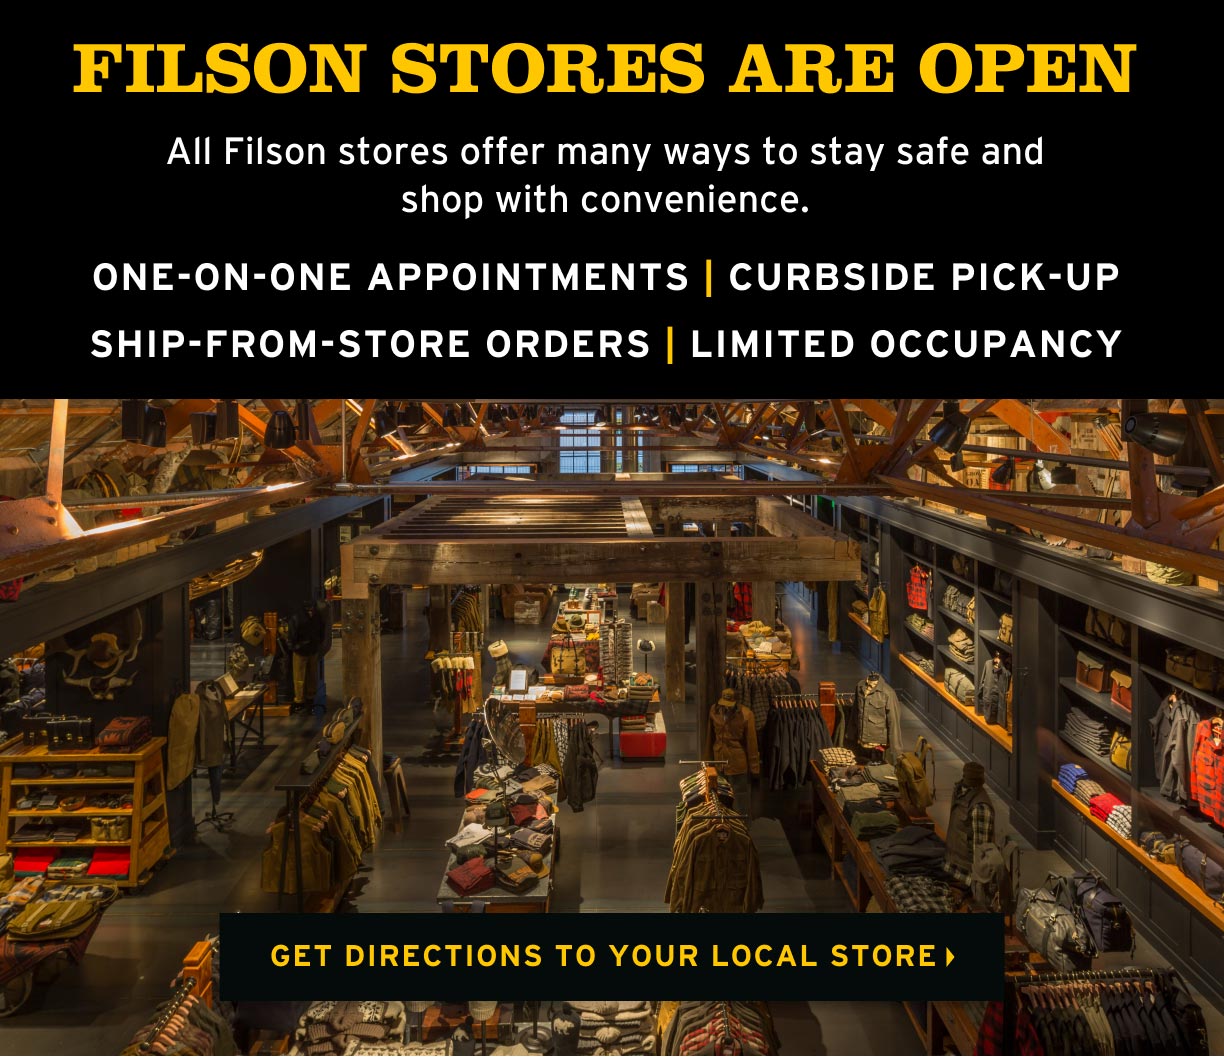 FIND YOUR STORE